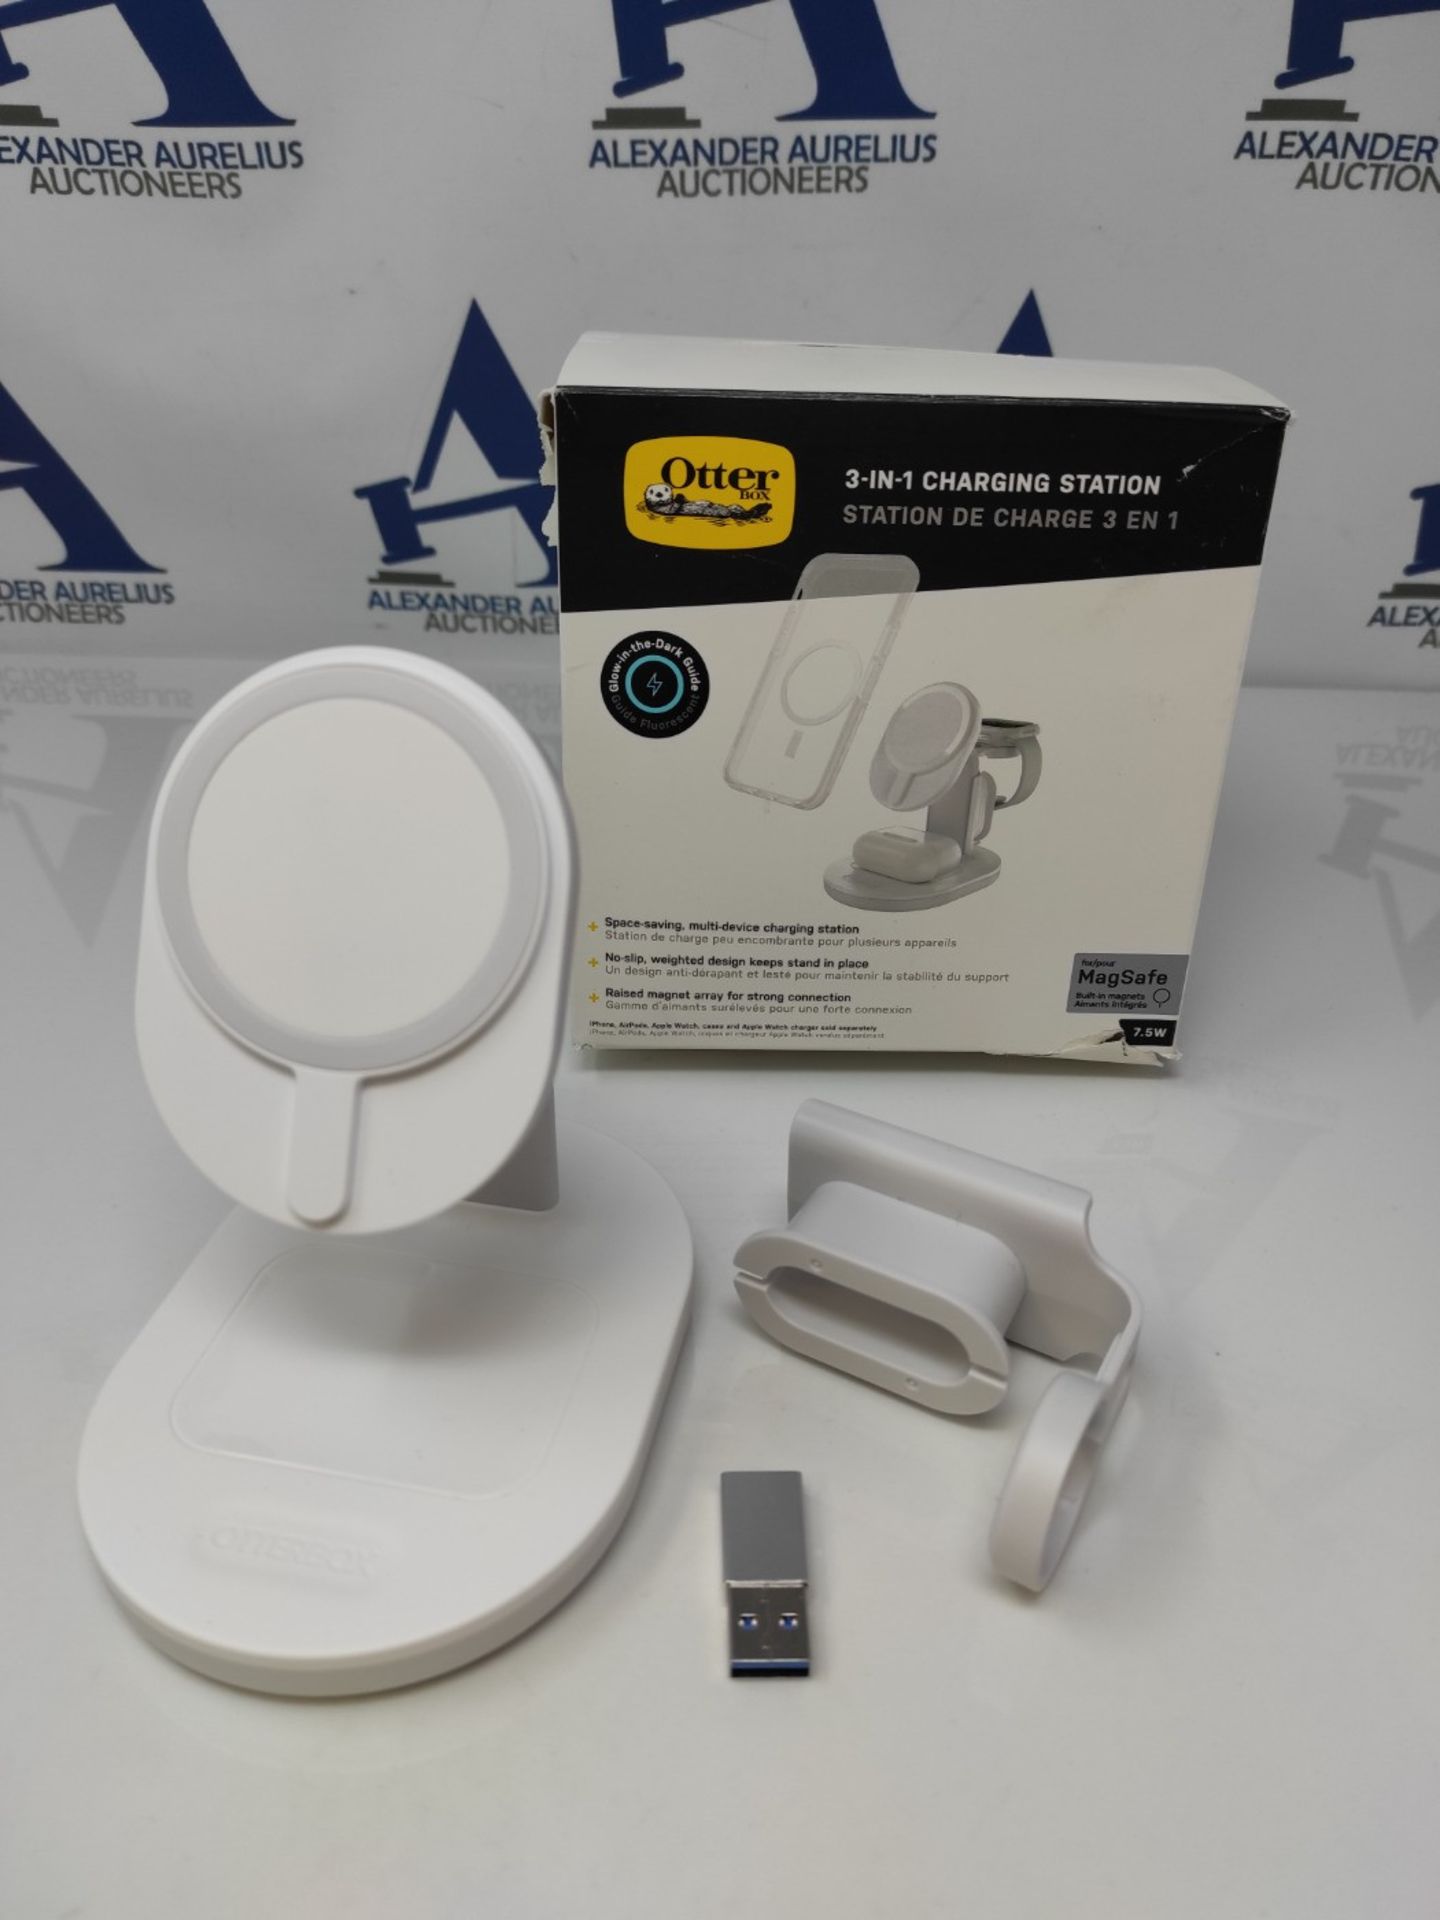 RRP £69.00 OtterBox Wireless 3 in 1 MagSafe Charging Stand, Strong Magnetic Alignment and Attachm - Image 2 of 2